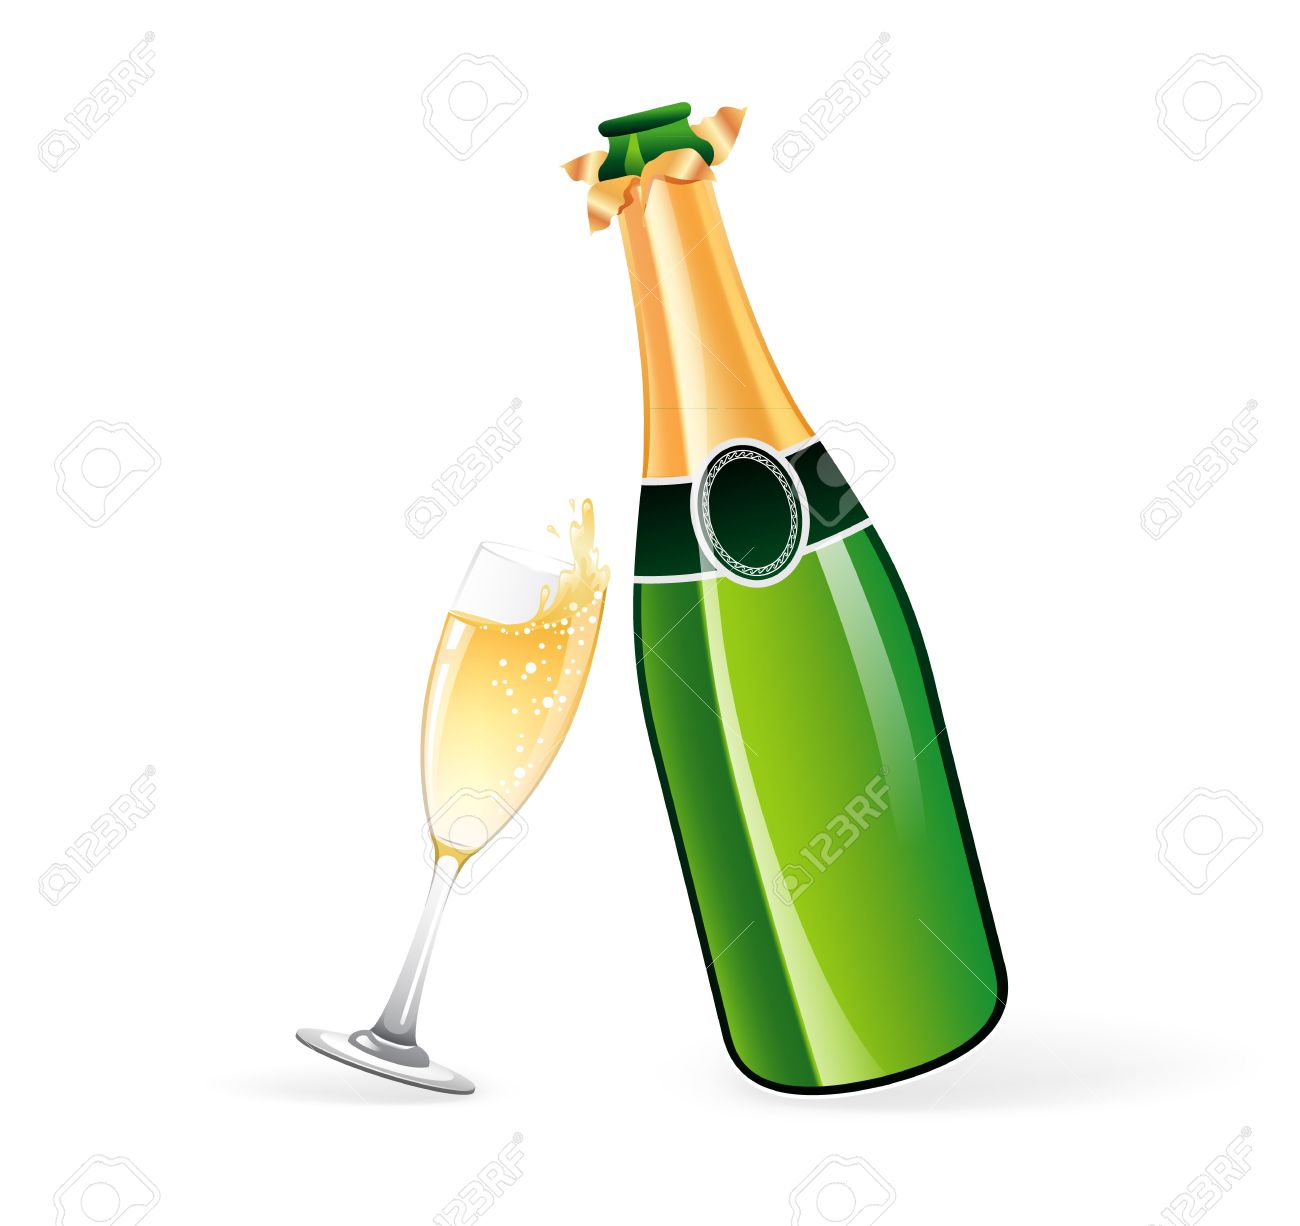 Champagne bottle clipart free download jpg 2